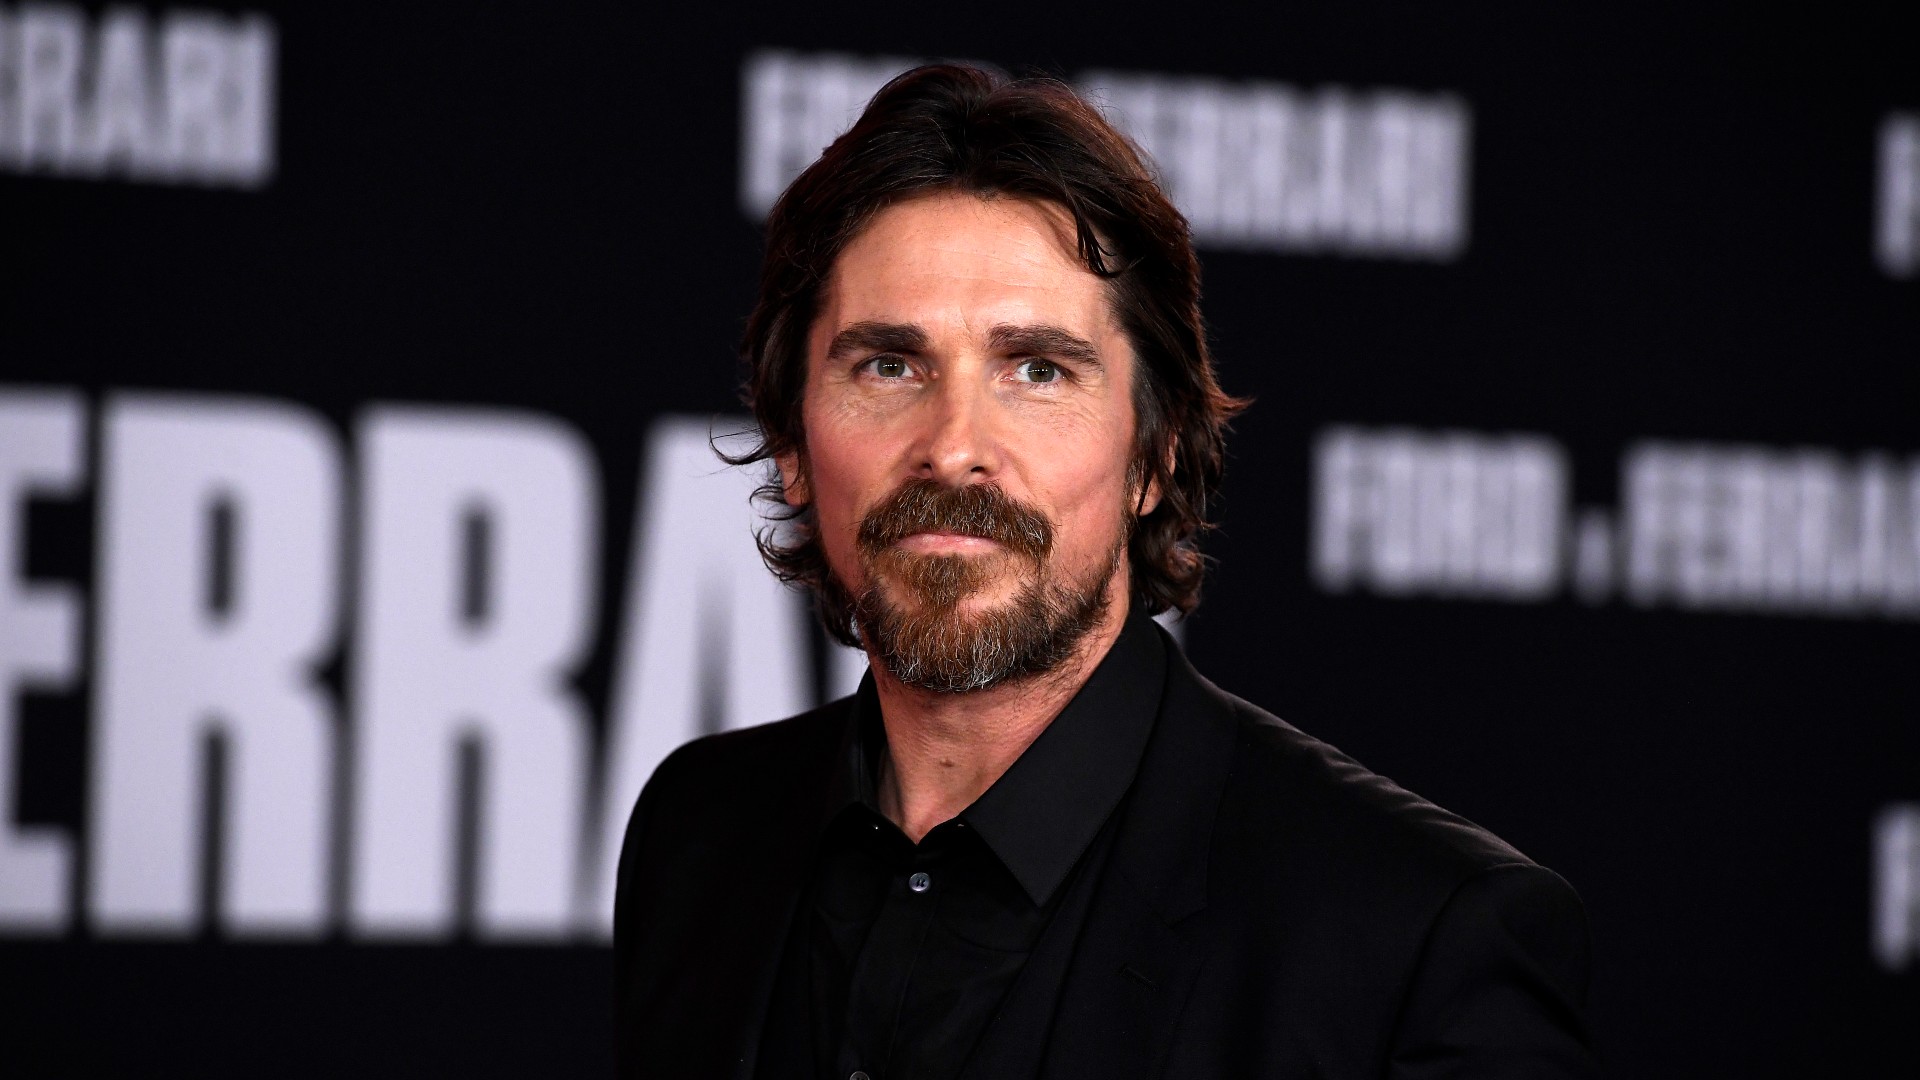 WATCH: Christian Bale's Chilling Villain Revealed in 'Thor: Love and Thunder' Trailer